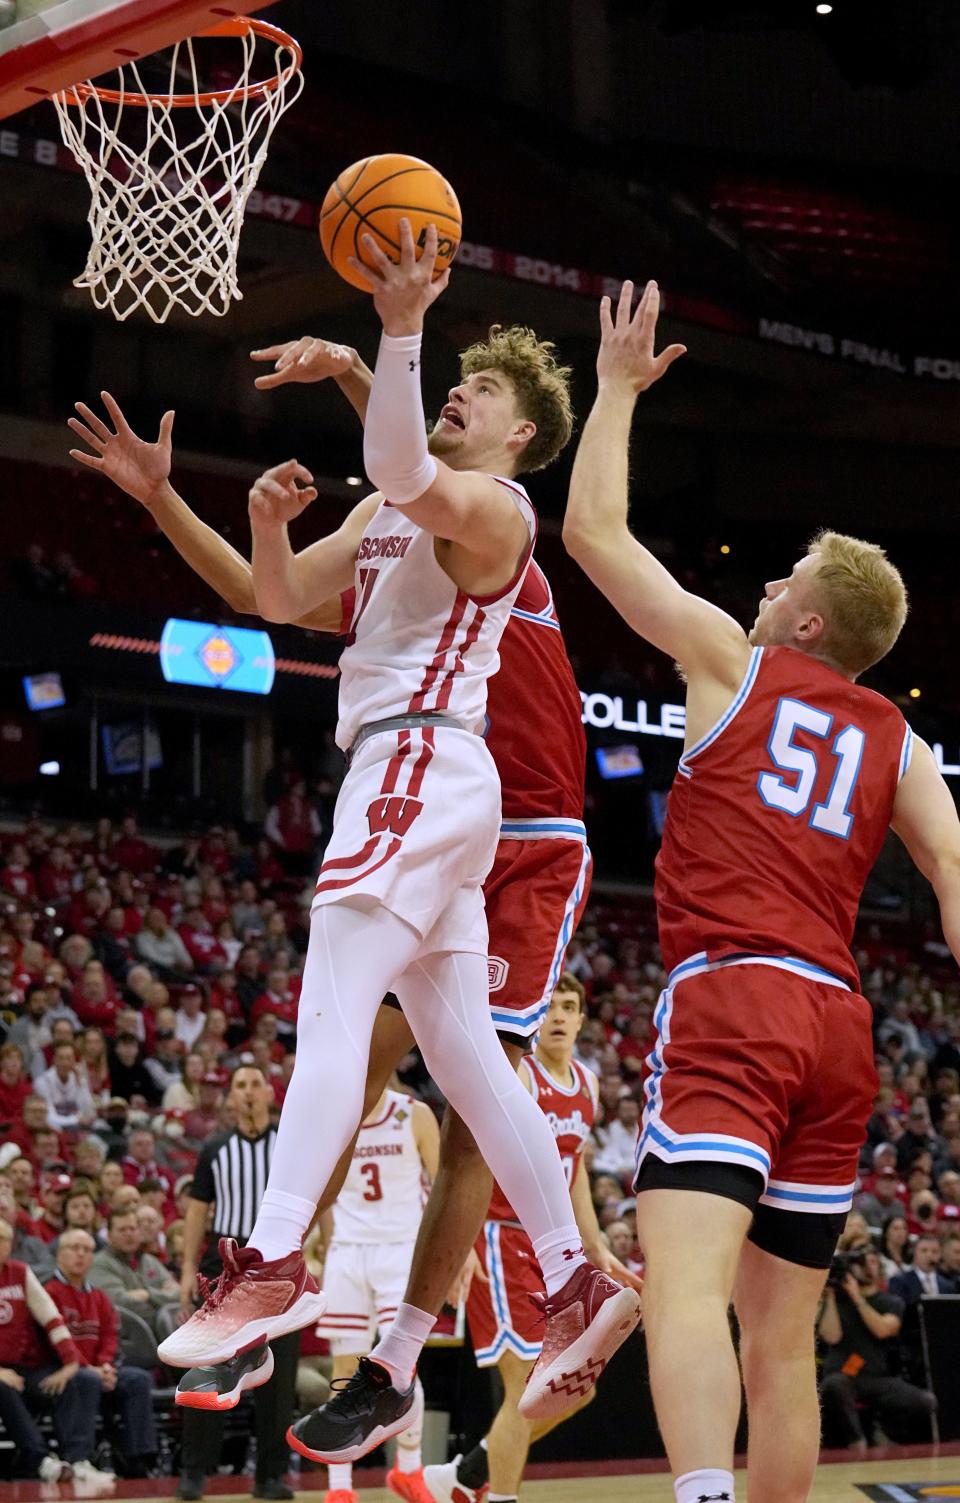 Max Klesmit is playing his best basketball as Wisconsin heads into the semifinals of the NIT on Tuesday against North Texas.